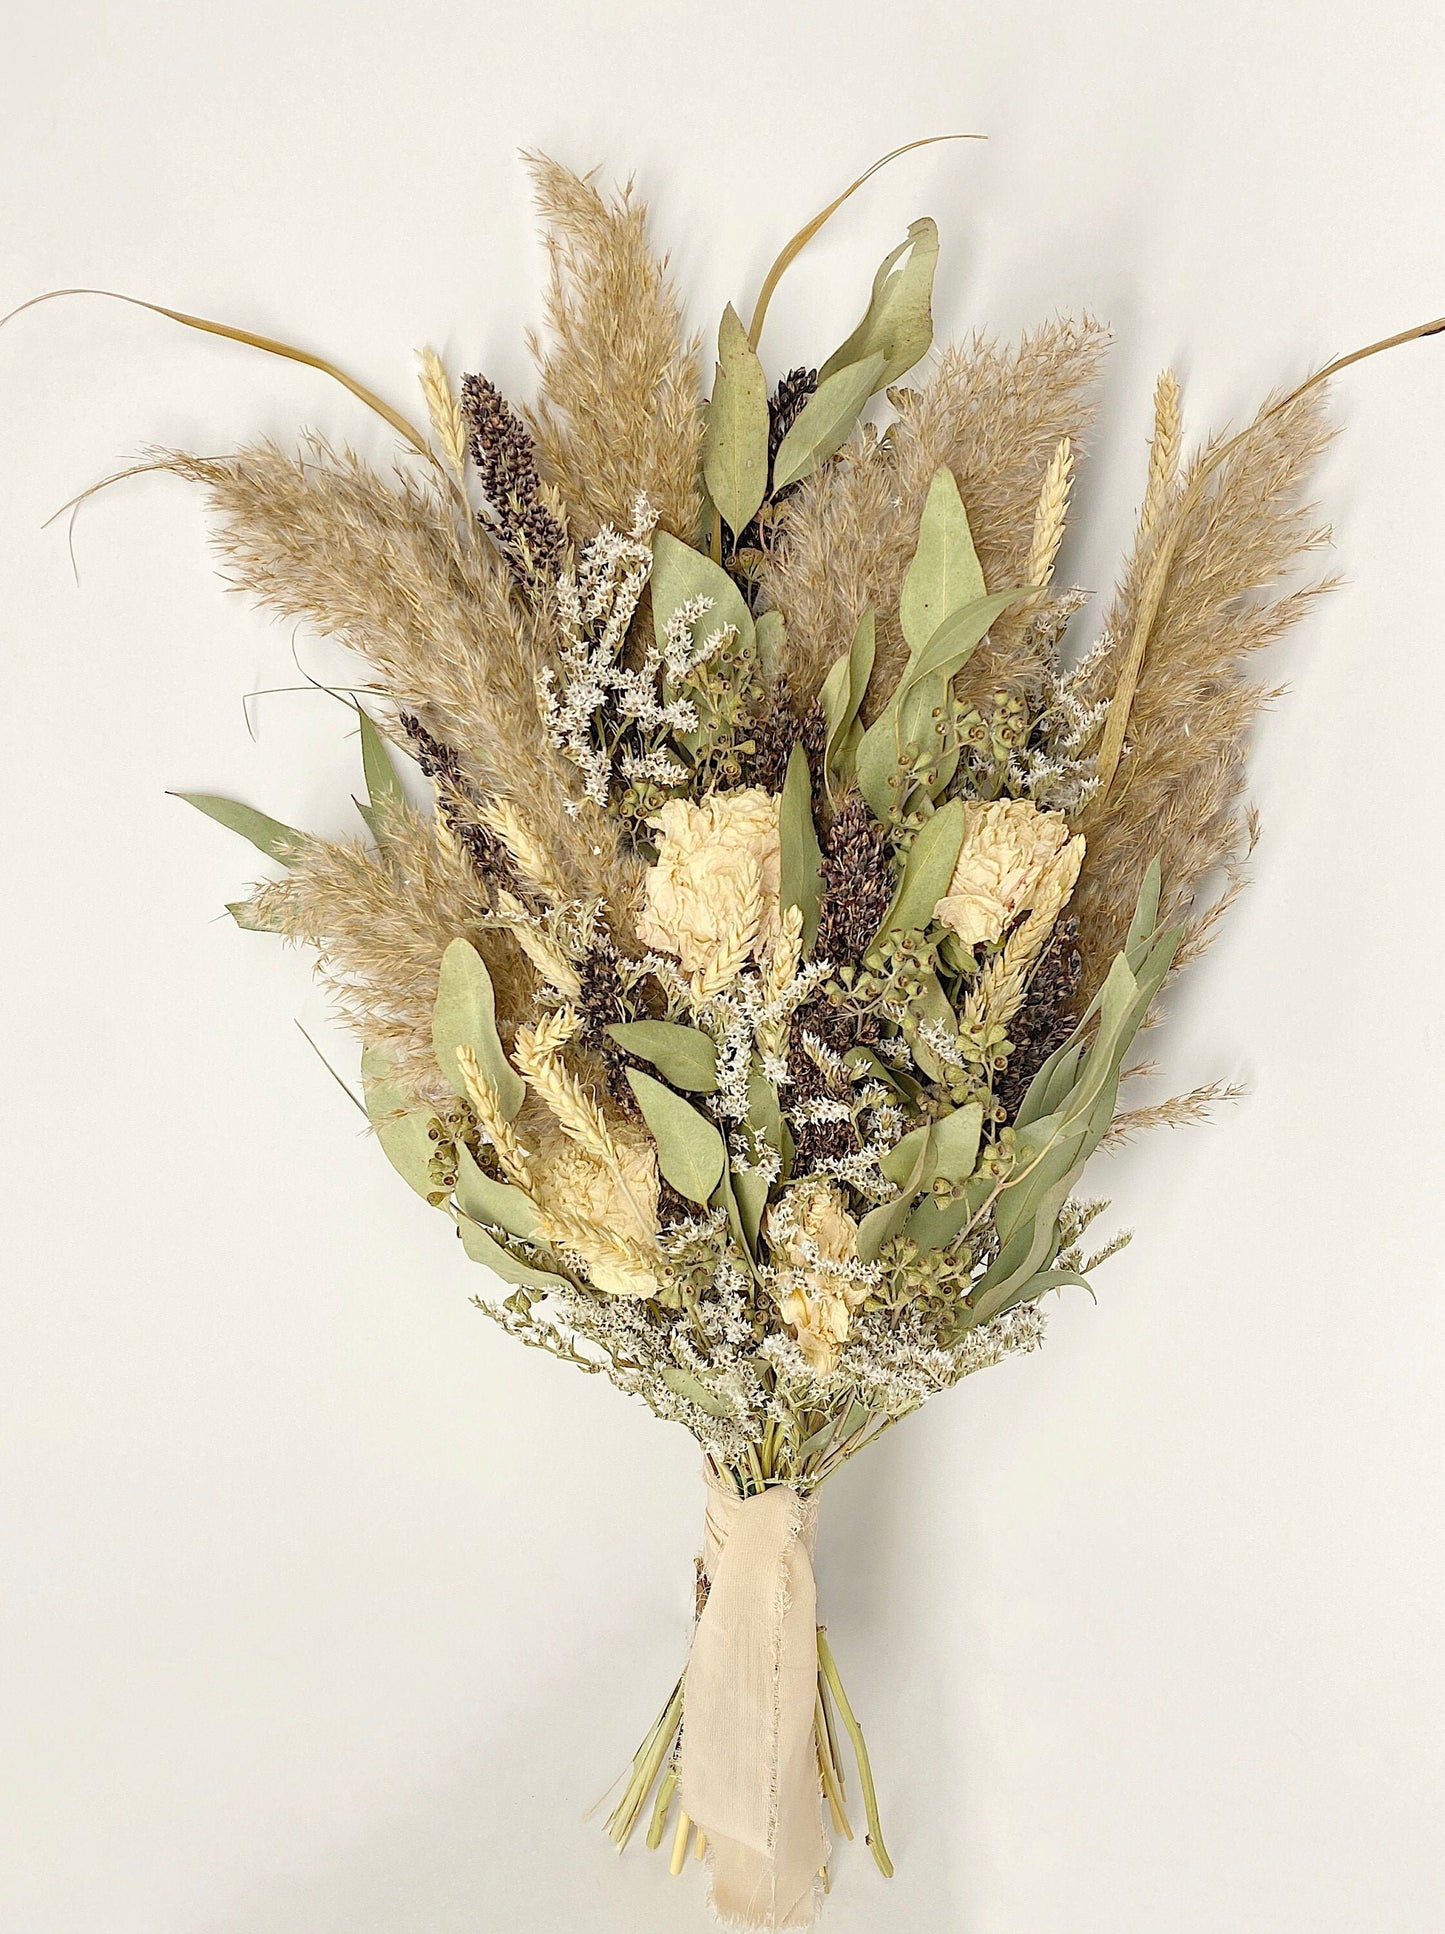 Off White Wedding Bouquet, Peonies, Floral, Beige, Bridal, Summer, Pampas Grass, Ribbon, Wheat, Cream and Green, Neutral, Dried